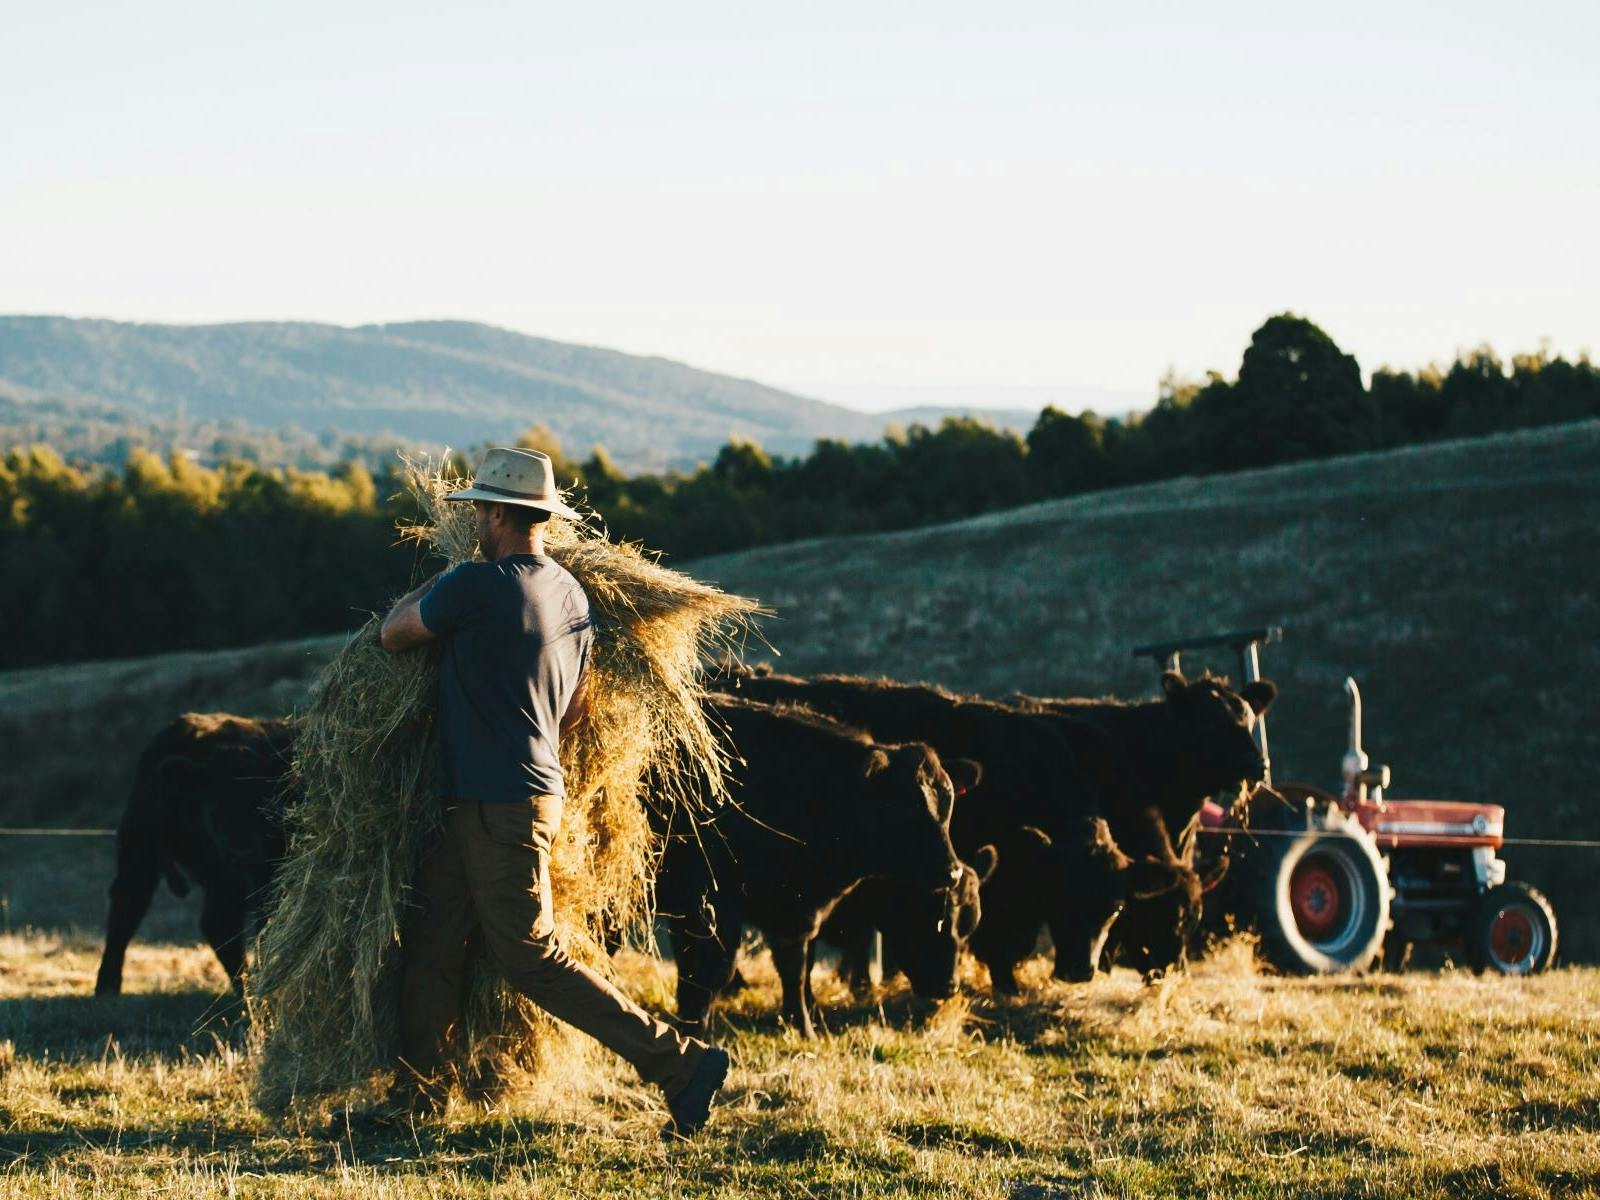 Man carrying hay with cows and tractor in background